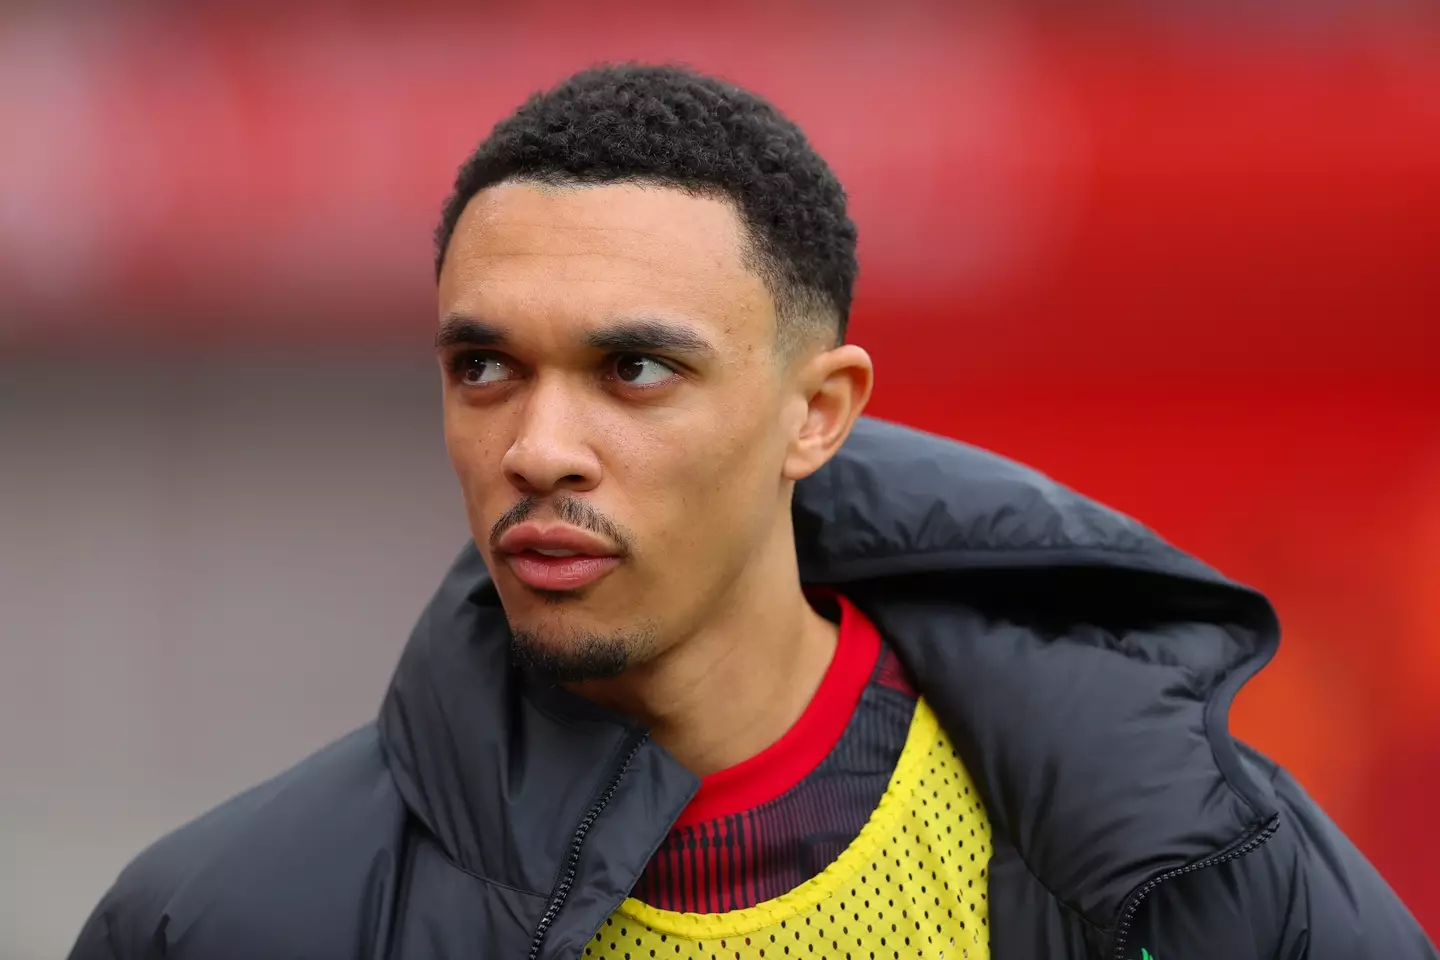 Alexander-Arnold admitted he sees himself as a right back (Getty)